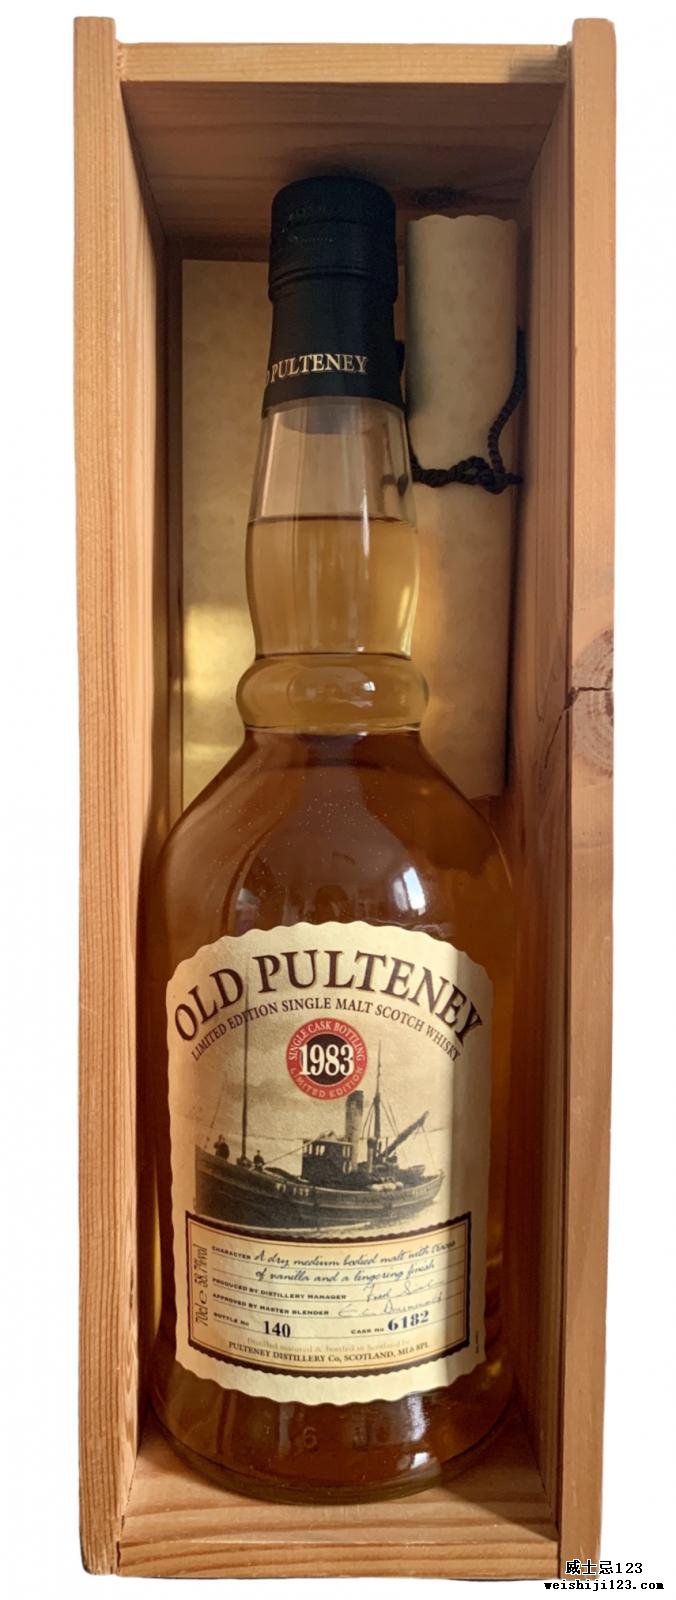 Old Pulteney 1983